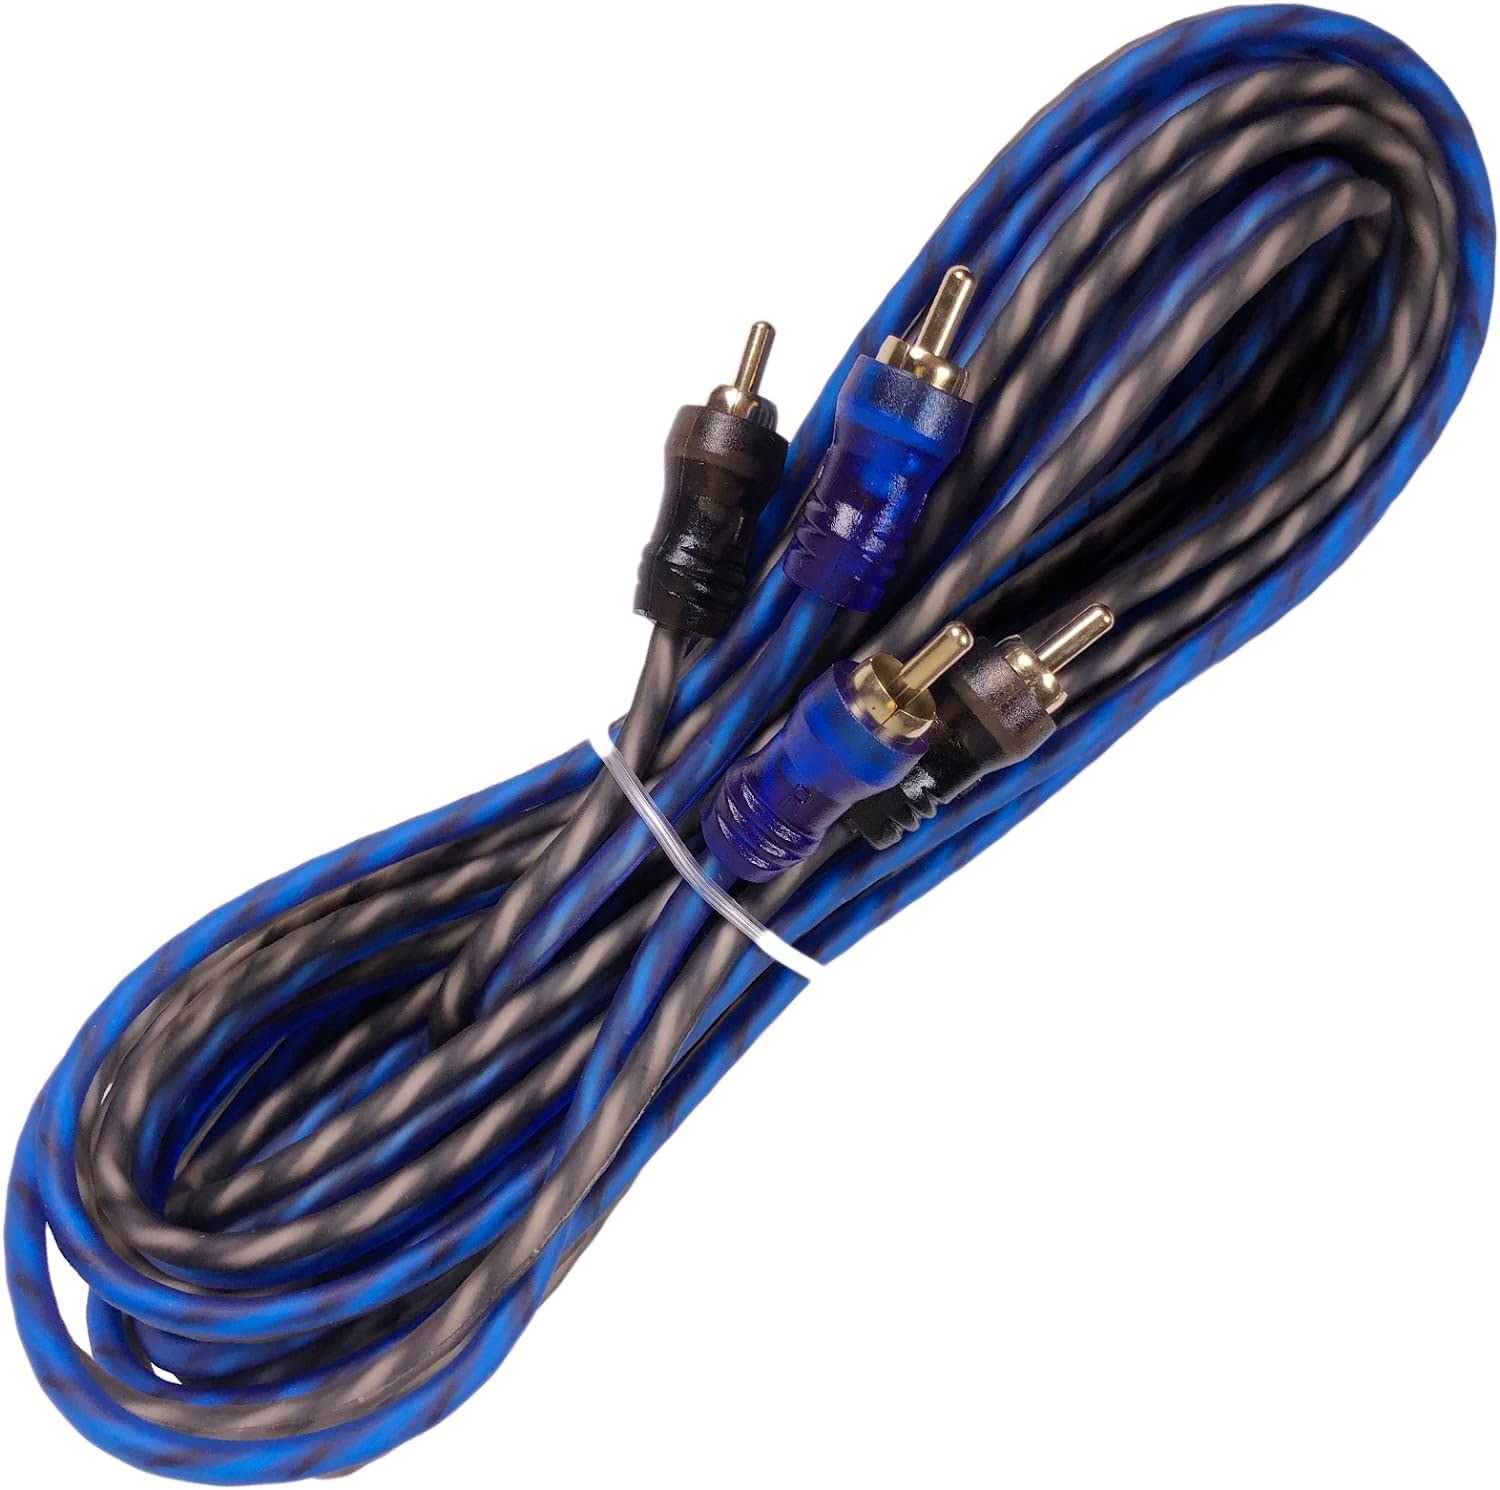 Complete Gravity Elite 0 Gauge Amp Kit Amplifier Install Wiring 0 Ga Wire 5000W to 8000W - Ultra Soft Wire - S1 Kit Blue - for Installer and DIY Hobbyist - Perfect for Car/Truck/Motorcycle/RV/ATV